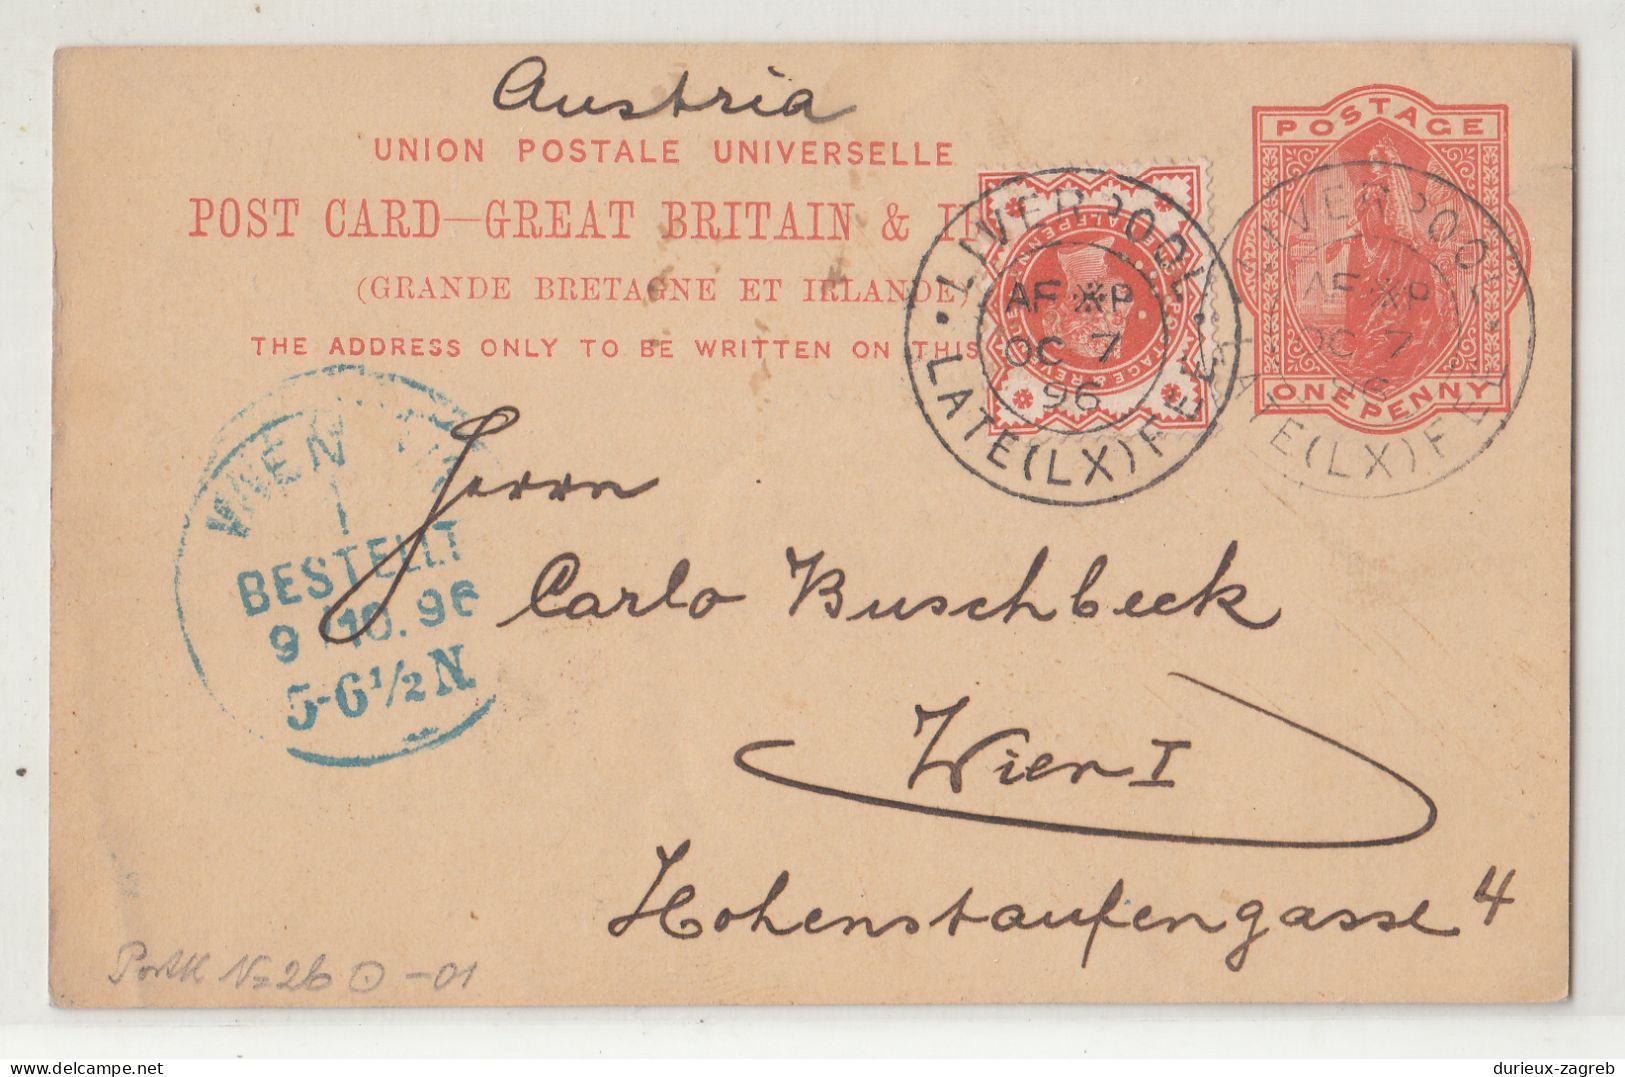 Gruning & Co., Liverpool Company Preprinted Postal Stationery Postcard Posted 1896 To Wien - Uprated B240401 - Luftpost & Aerogramme